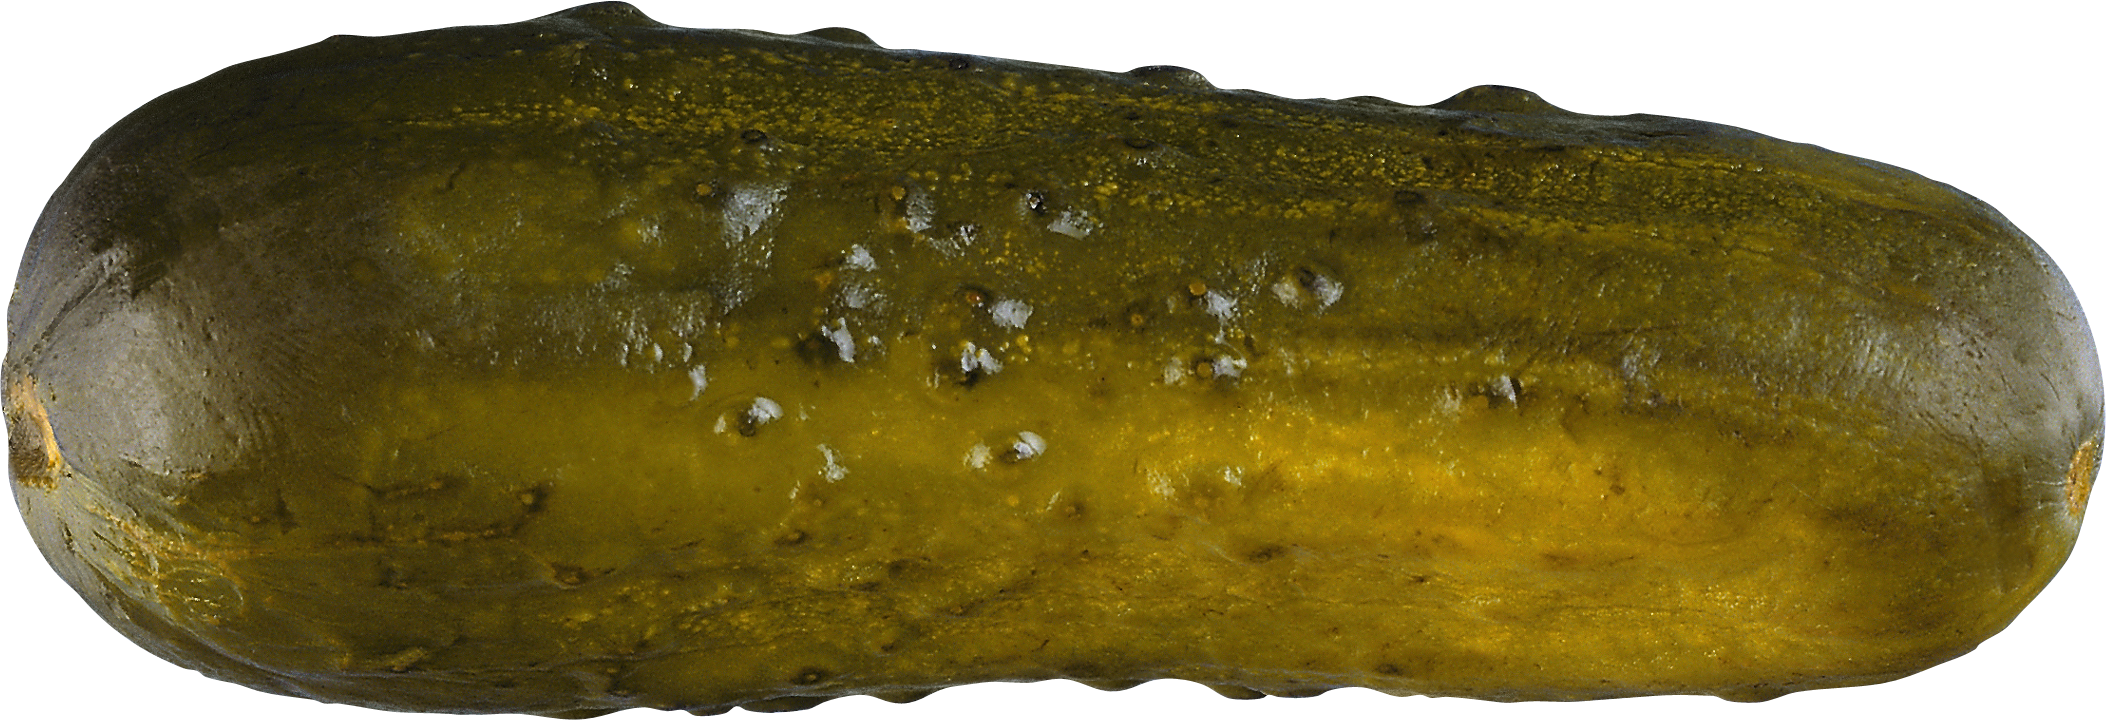 Cucumber Png - Pickle, Transparent background PNG HD thumbnail